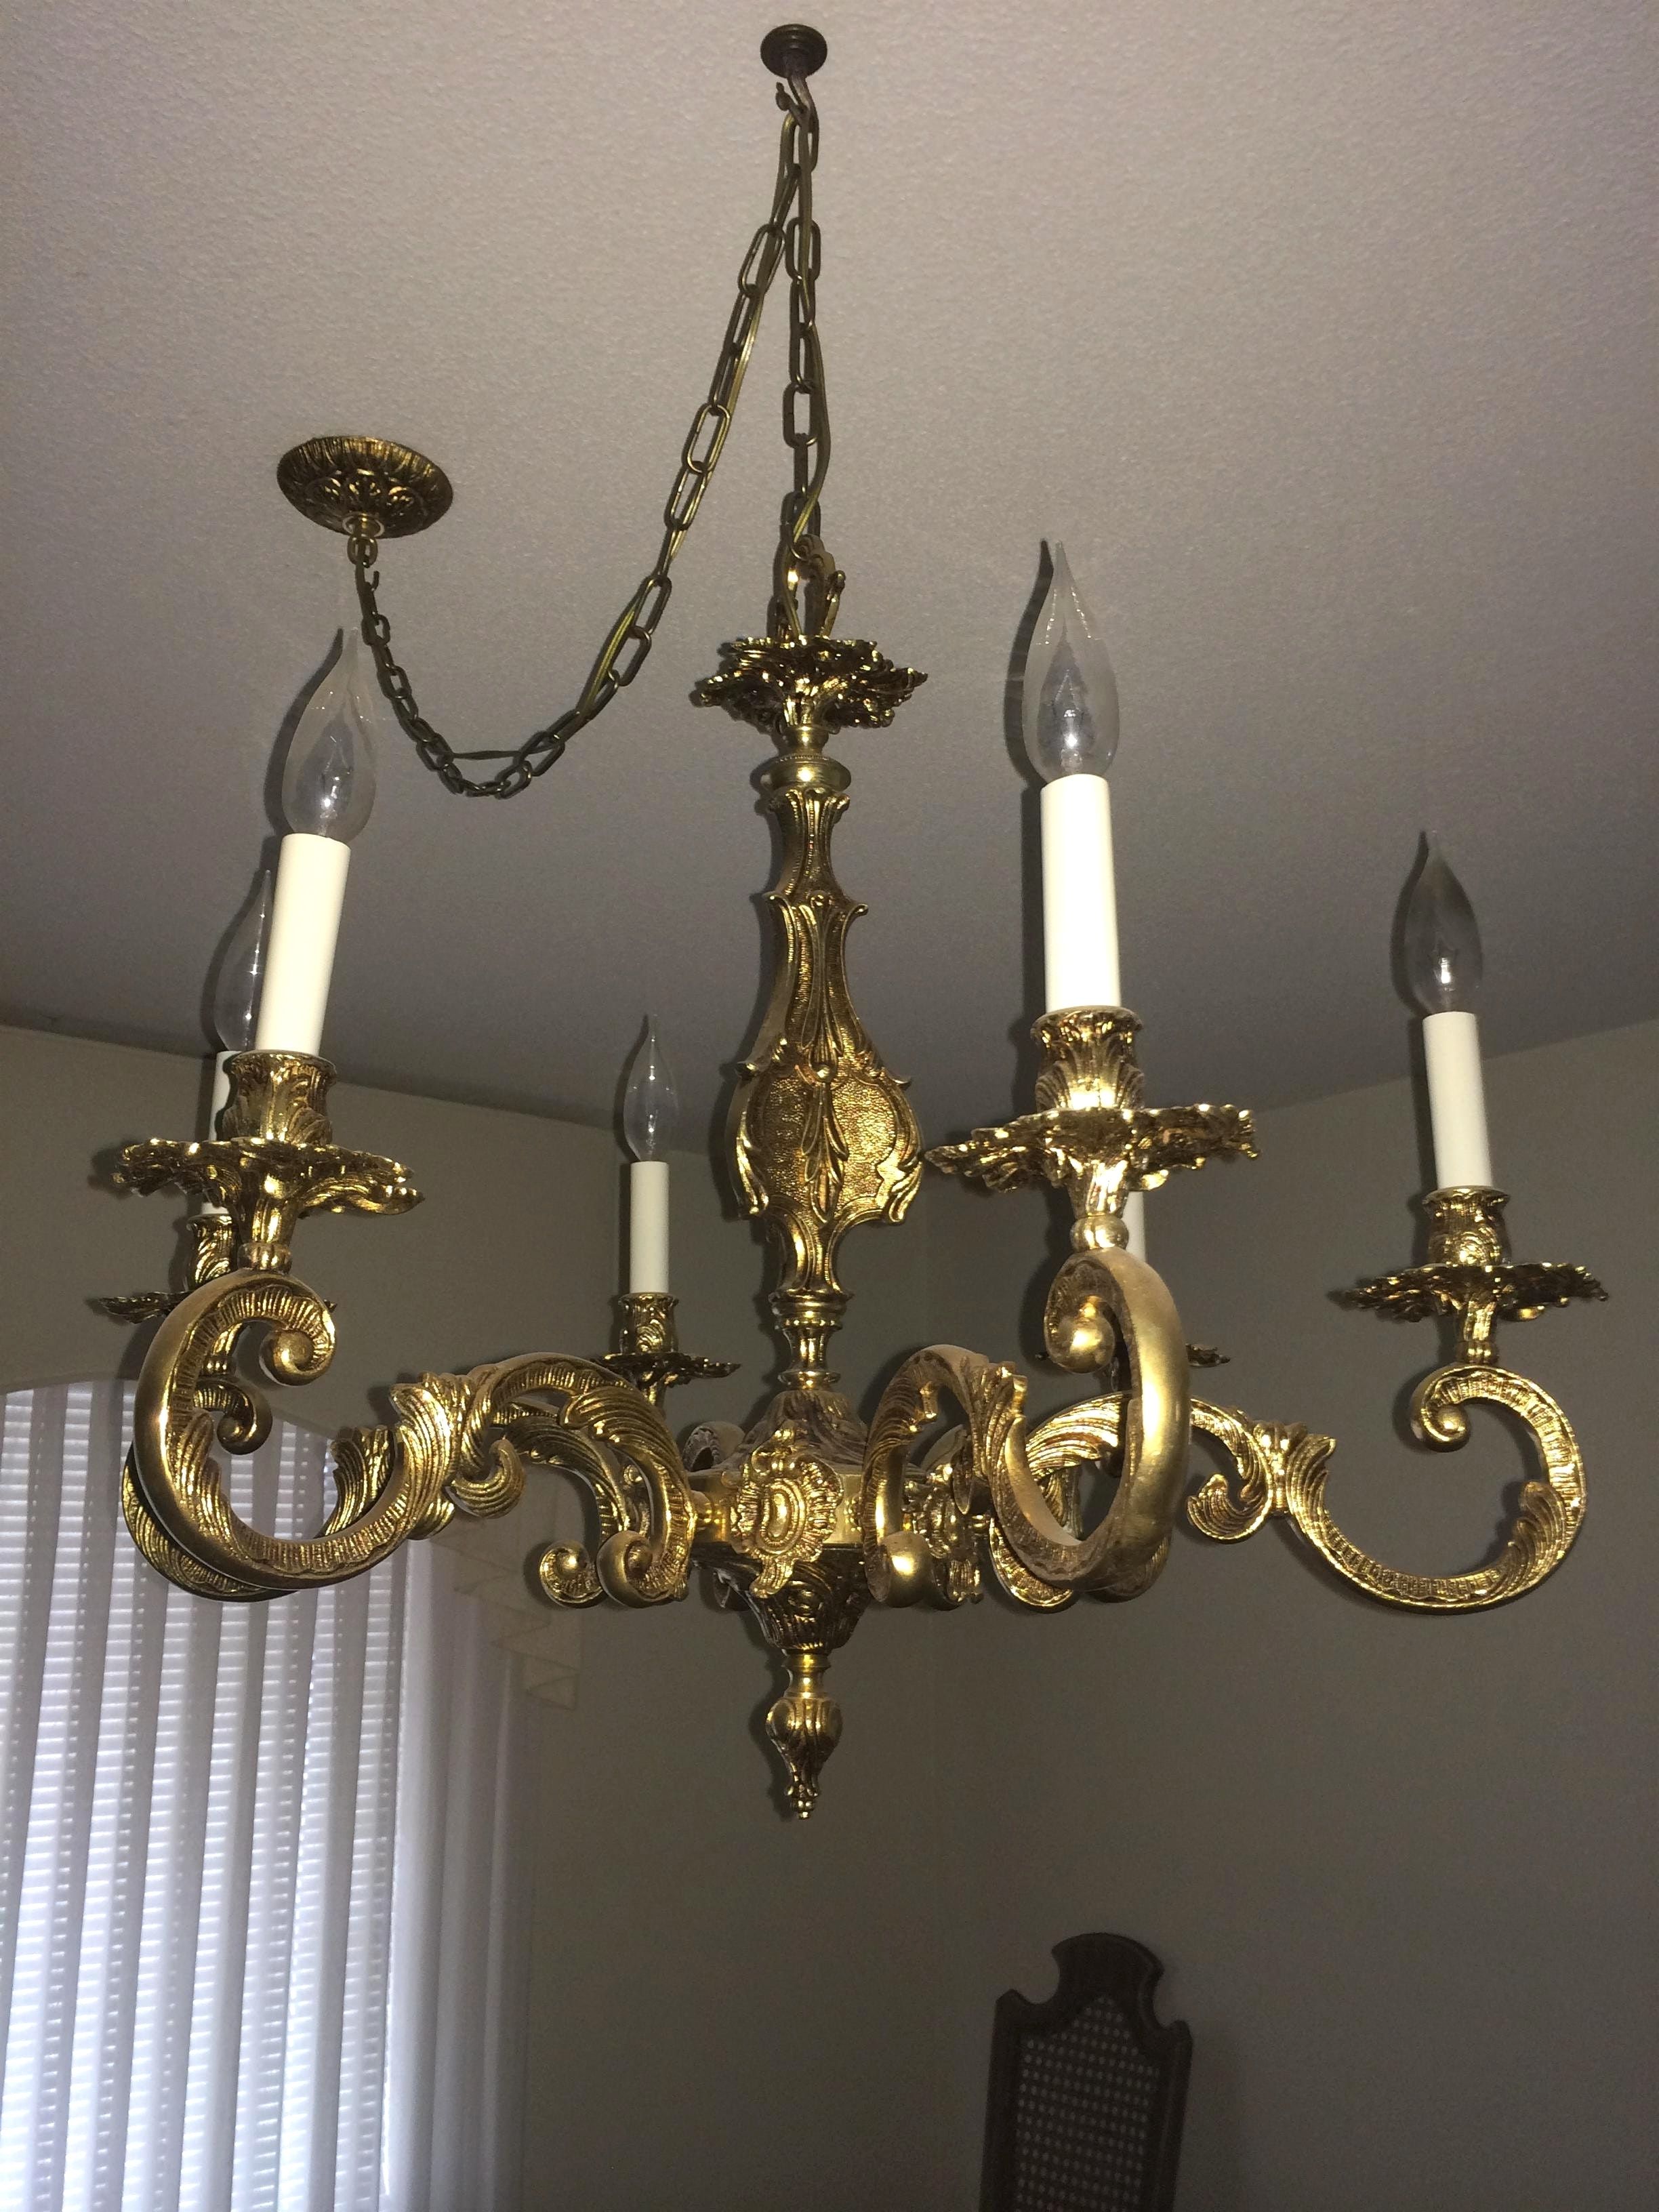 Fashionable Old Brass Chandelier Inside Light : Antique Brass Chandelier Value With Appraisal Instappraisal (View 11 of 15)